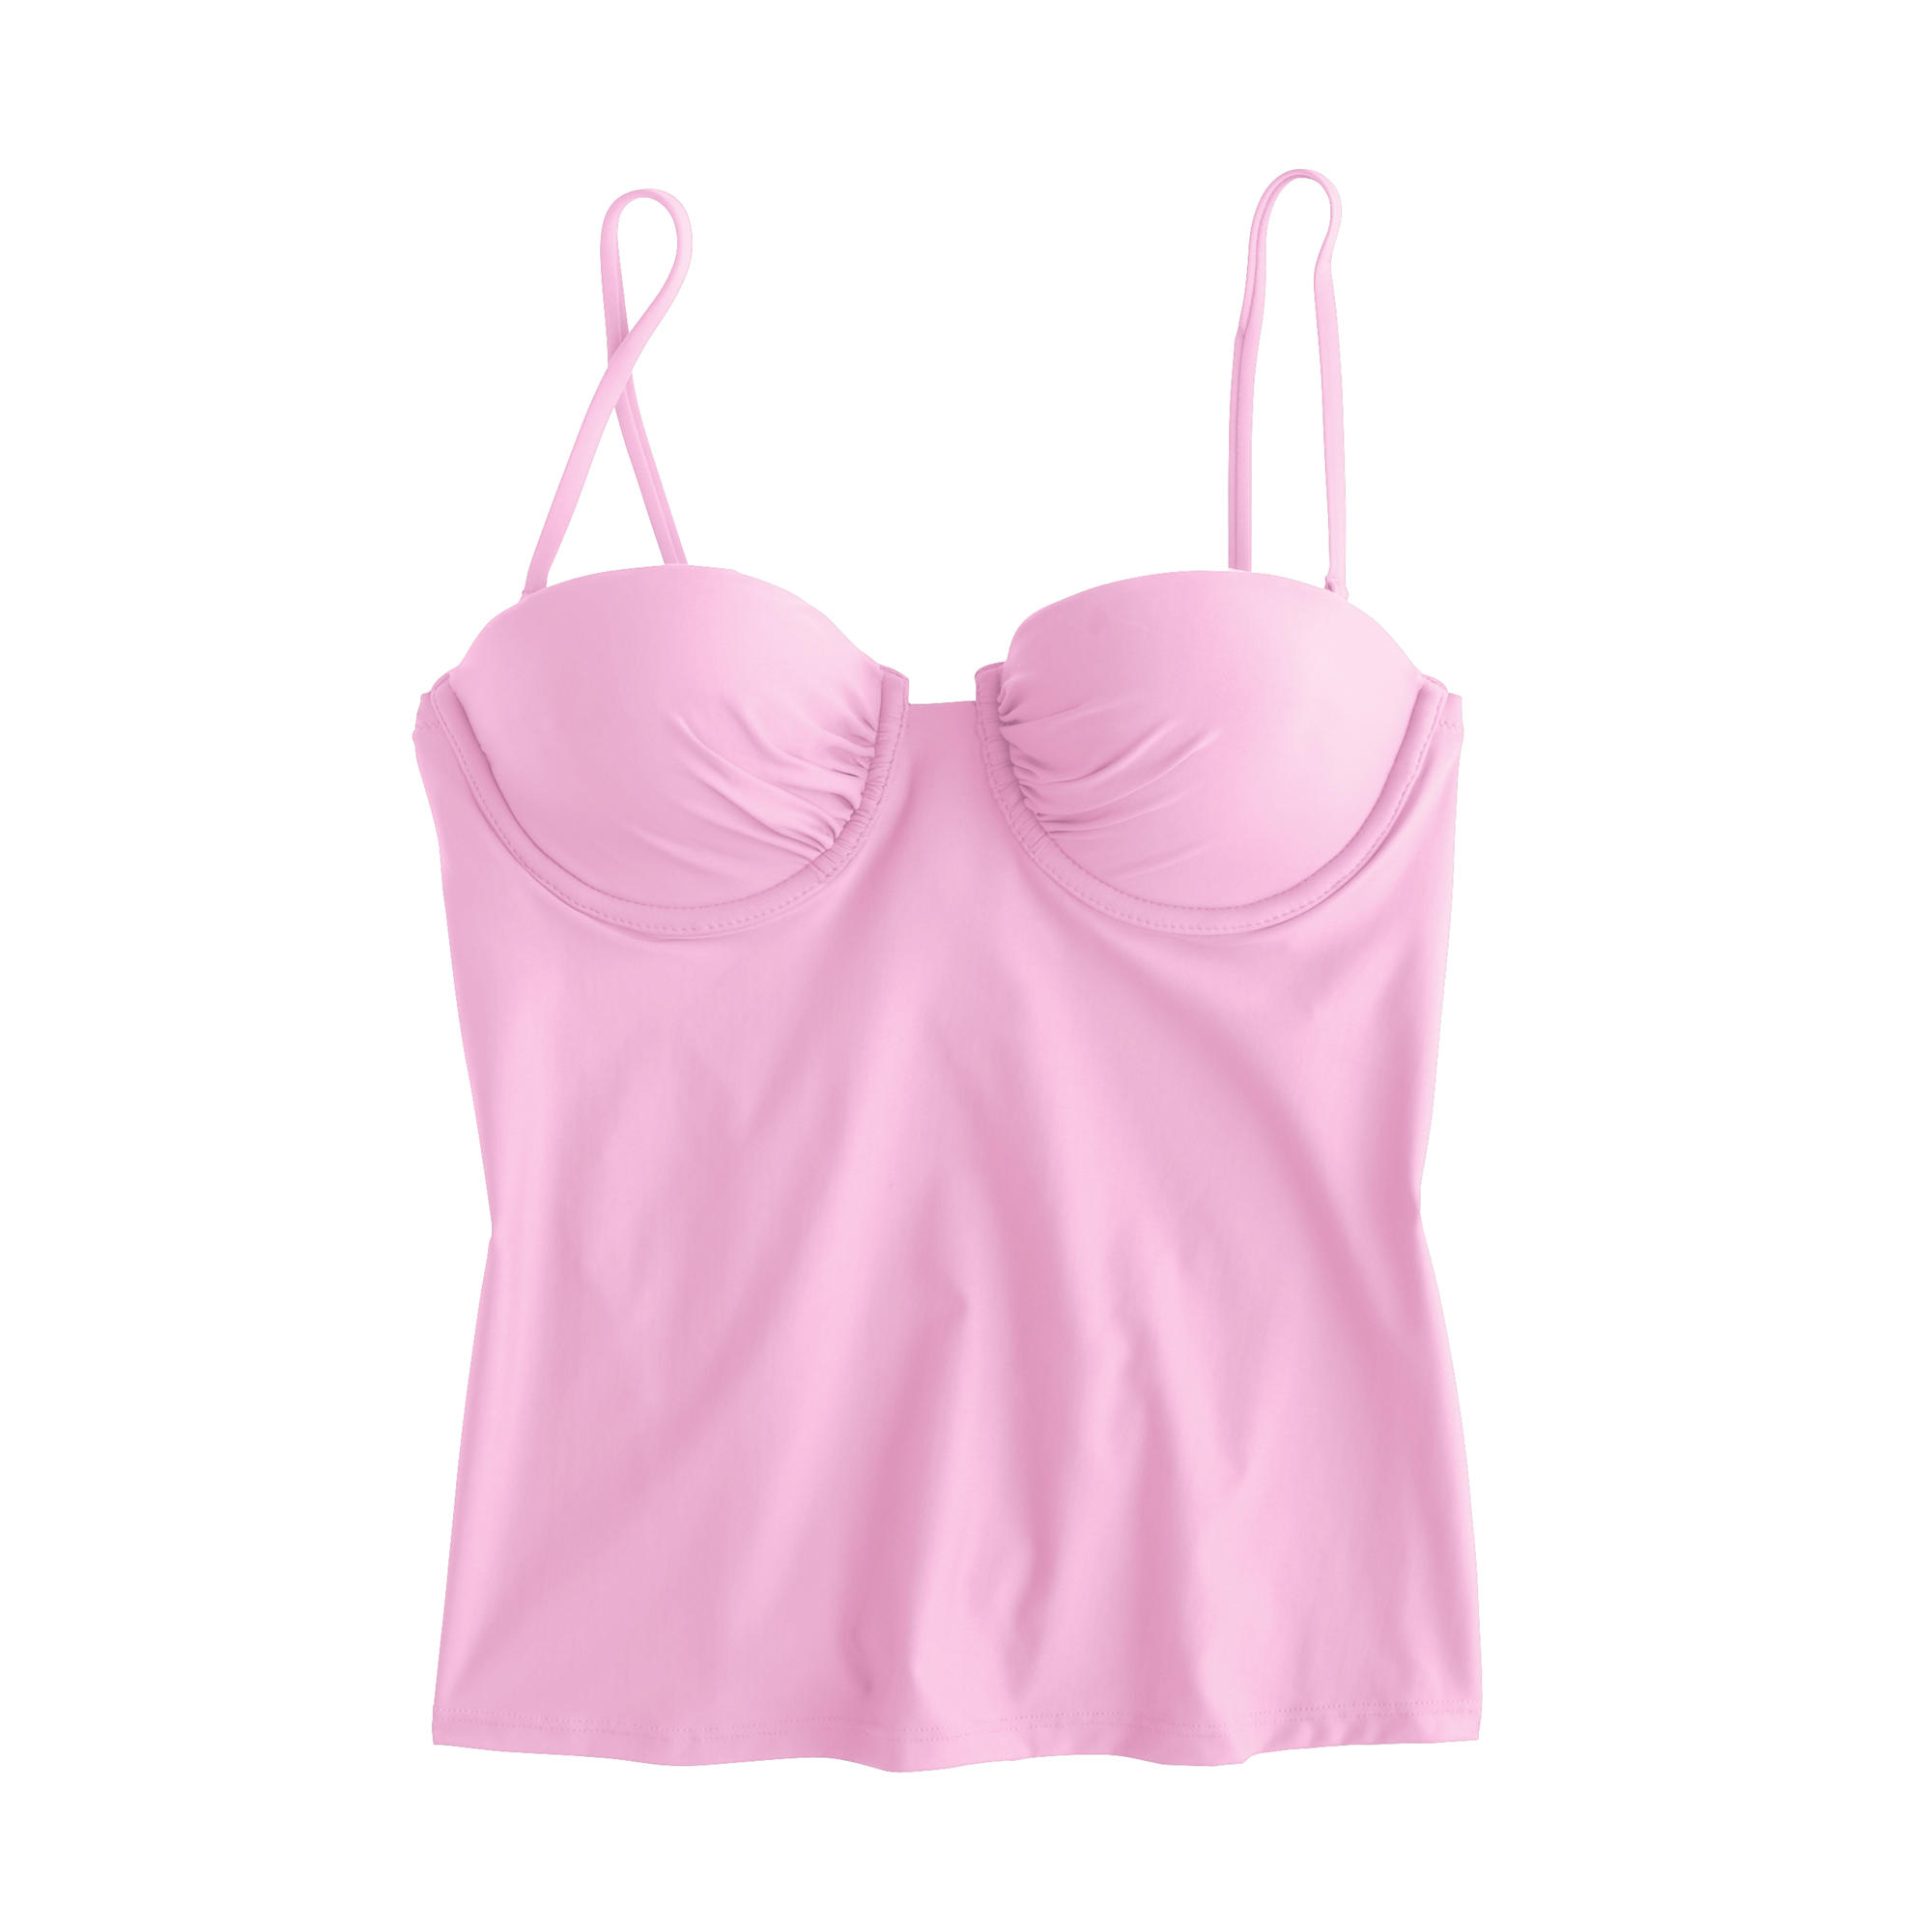 J.crew D-cup Underwire Tankini Top in Pink | Lyst